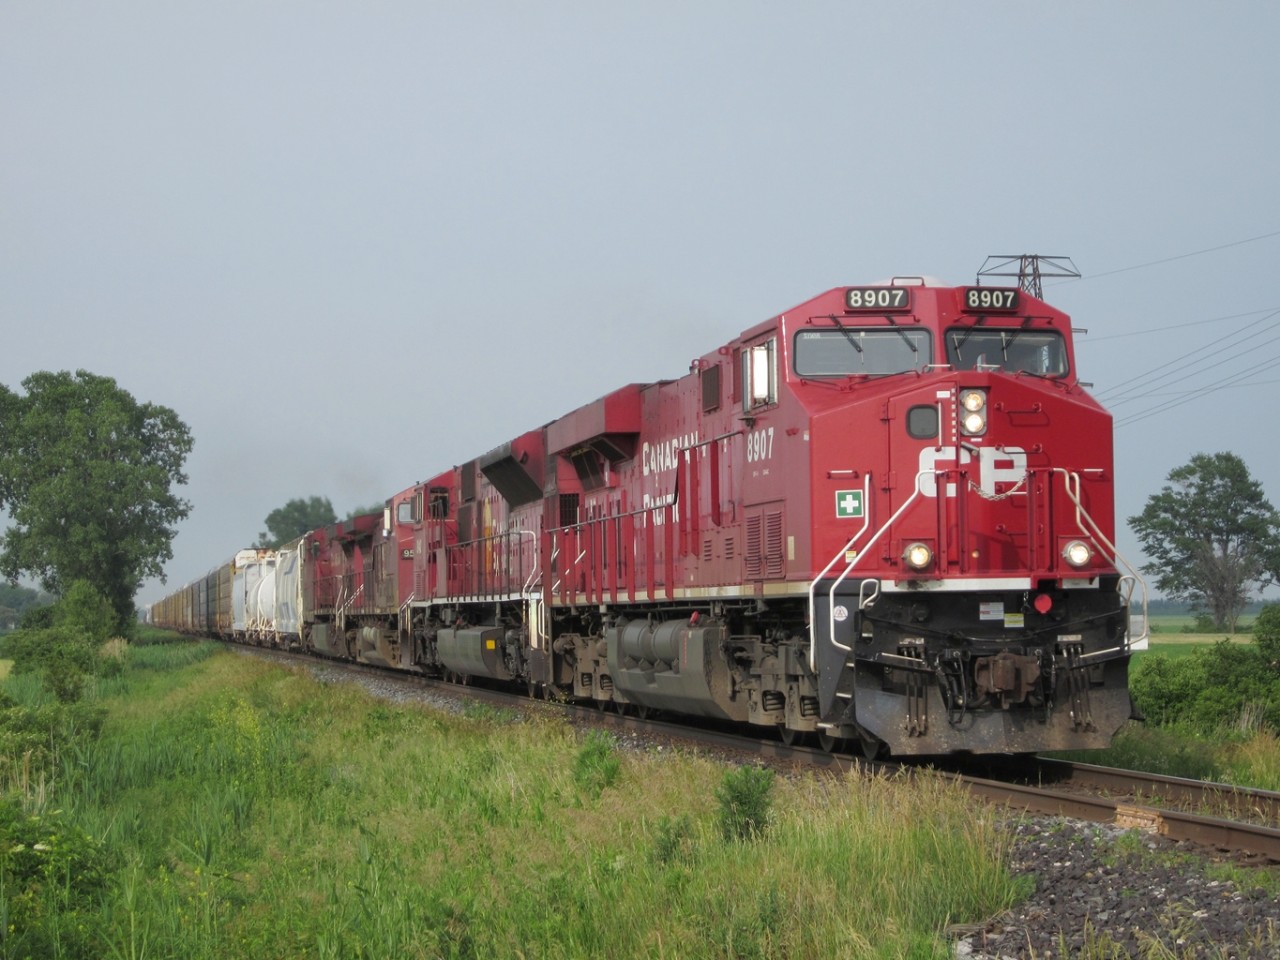 CP 441 is led by a whole lot of horsepower, including 8907-9142-9541-9678.